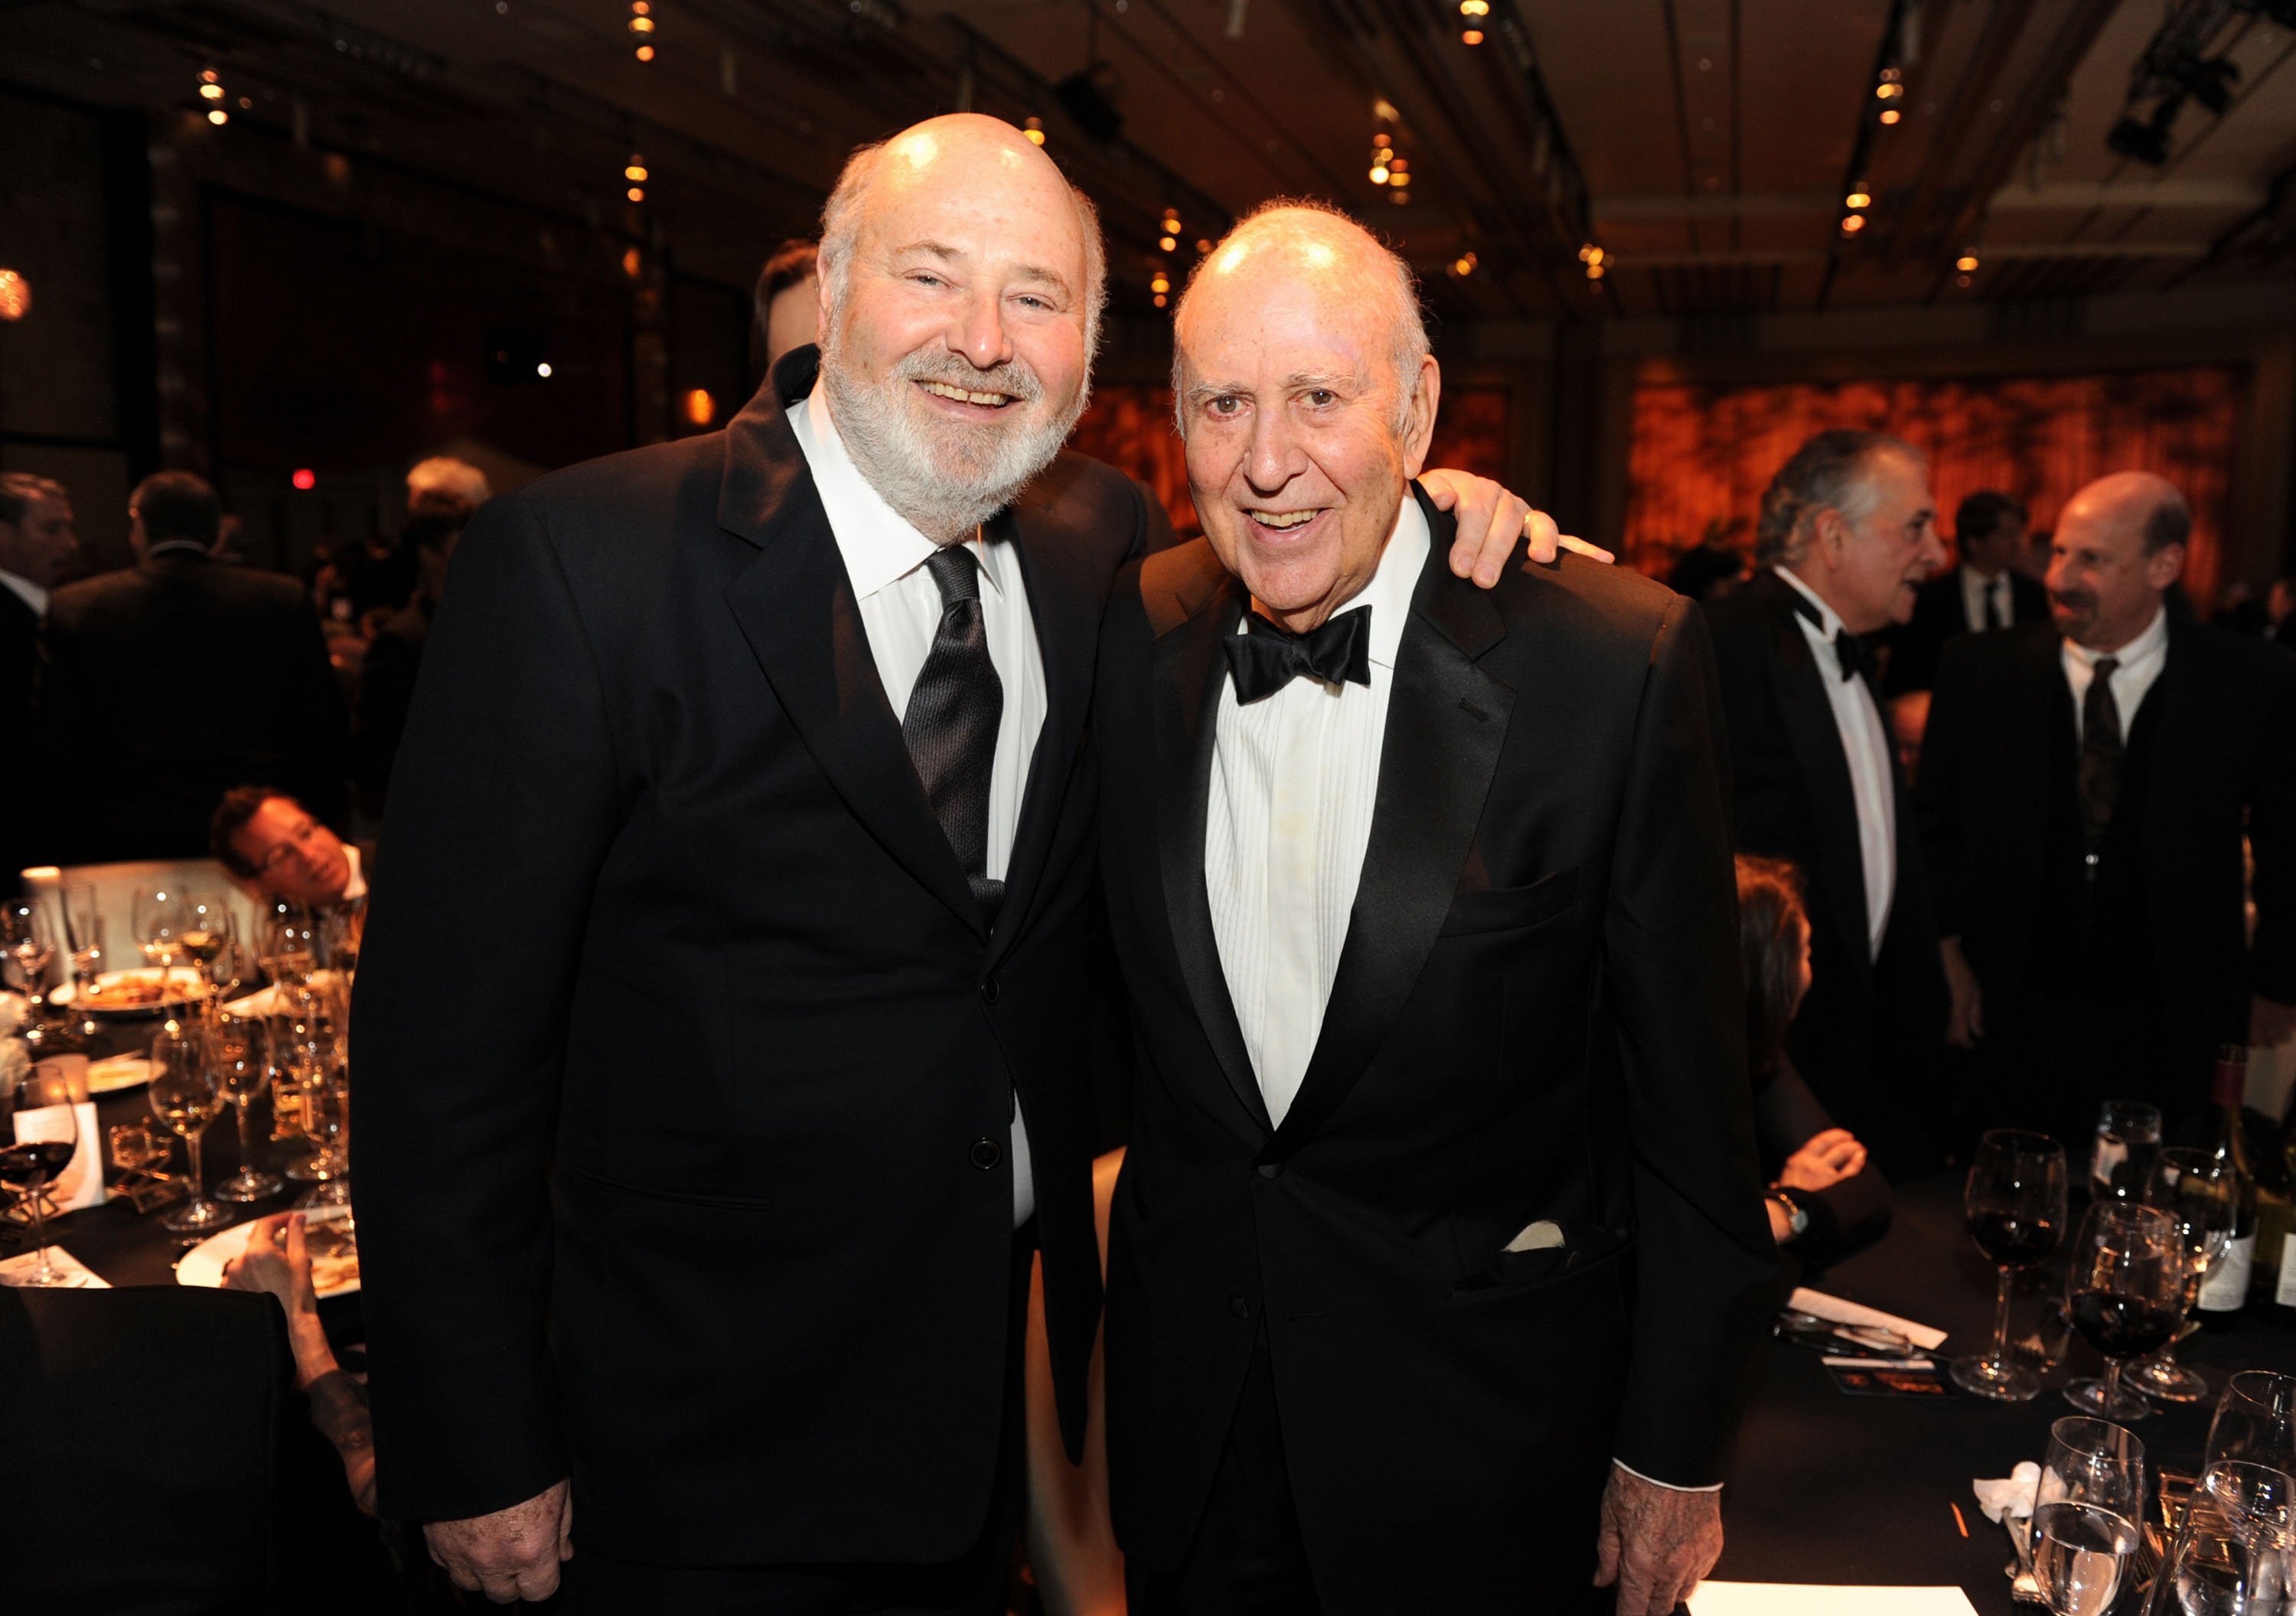 Rob Reiner and Master of Ceremonies Carl Reiner attend the 63rd Annual Directors Guild Of America Awards held at the Grand Ballroom at Hollywood & Highland on January 29, 2011 in Hollywood, California | Photo: Getty Images